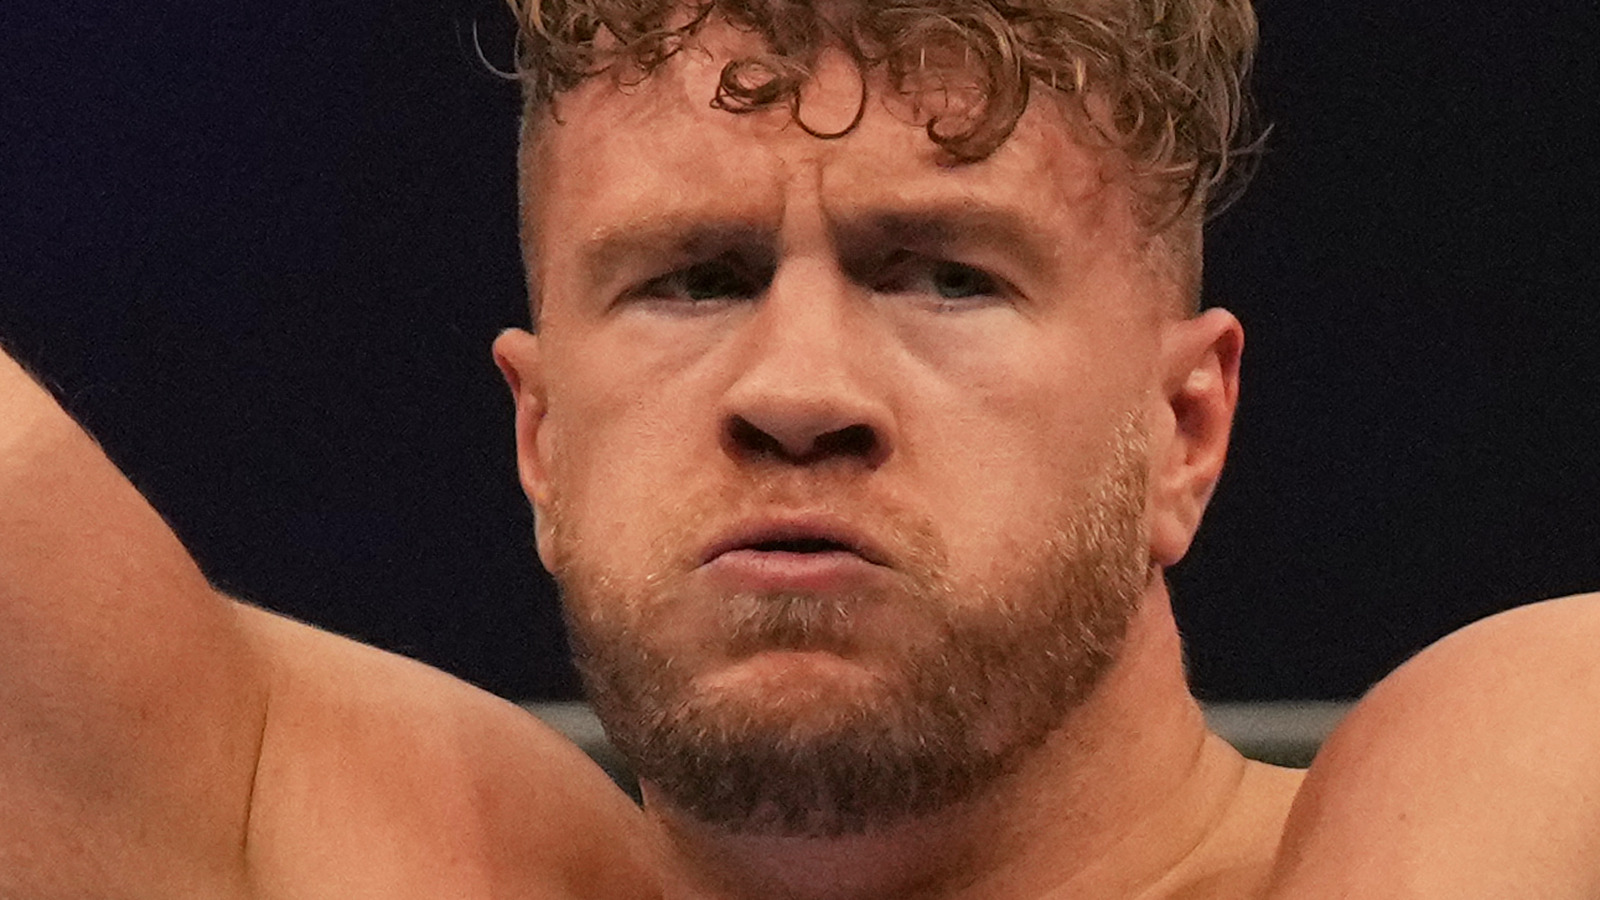 Will Ospreay Has A Permanent Scar From Kenny Omega Match At NJPW Wrestle Kingdom